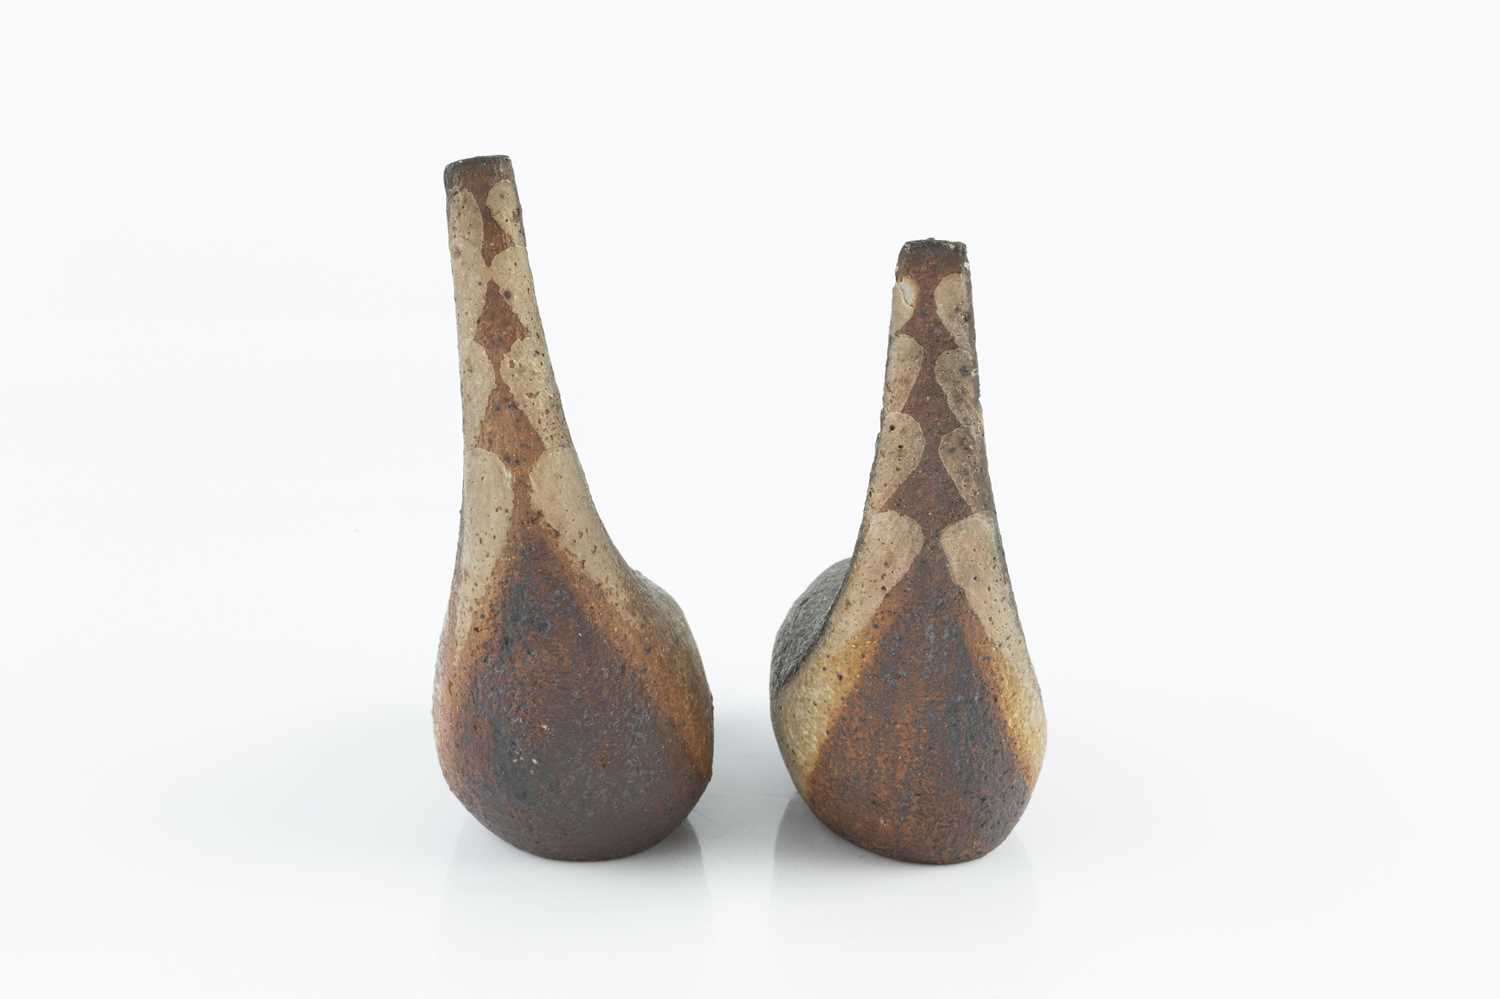 Rosemary Wren (1922-2013) at Oxshott Pottery A pair of swallows impressed potter's and pottery seals - Image 3 of 5